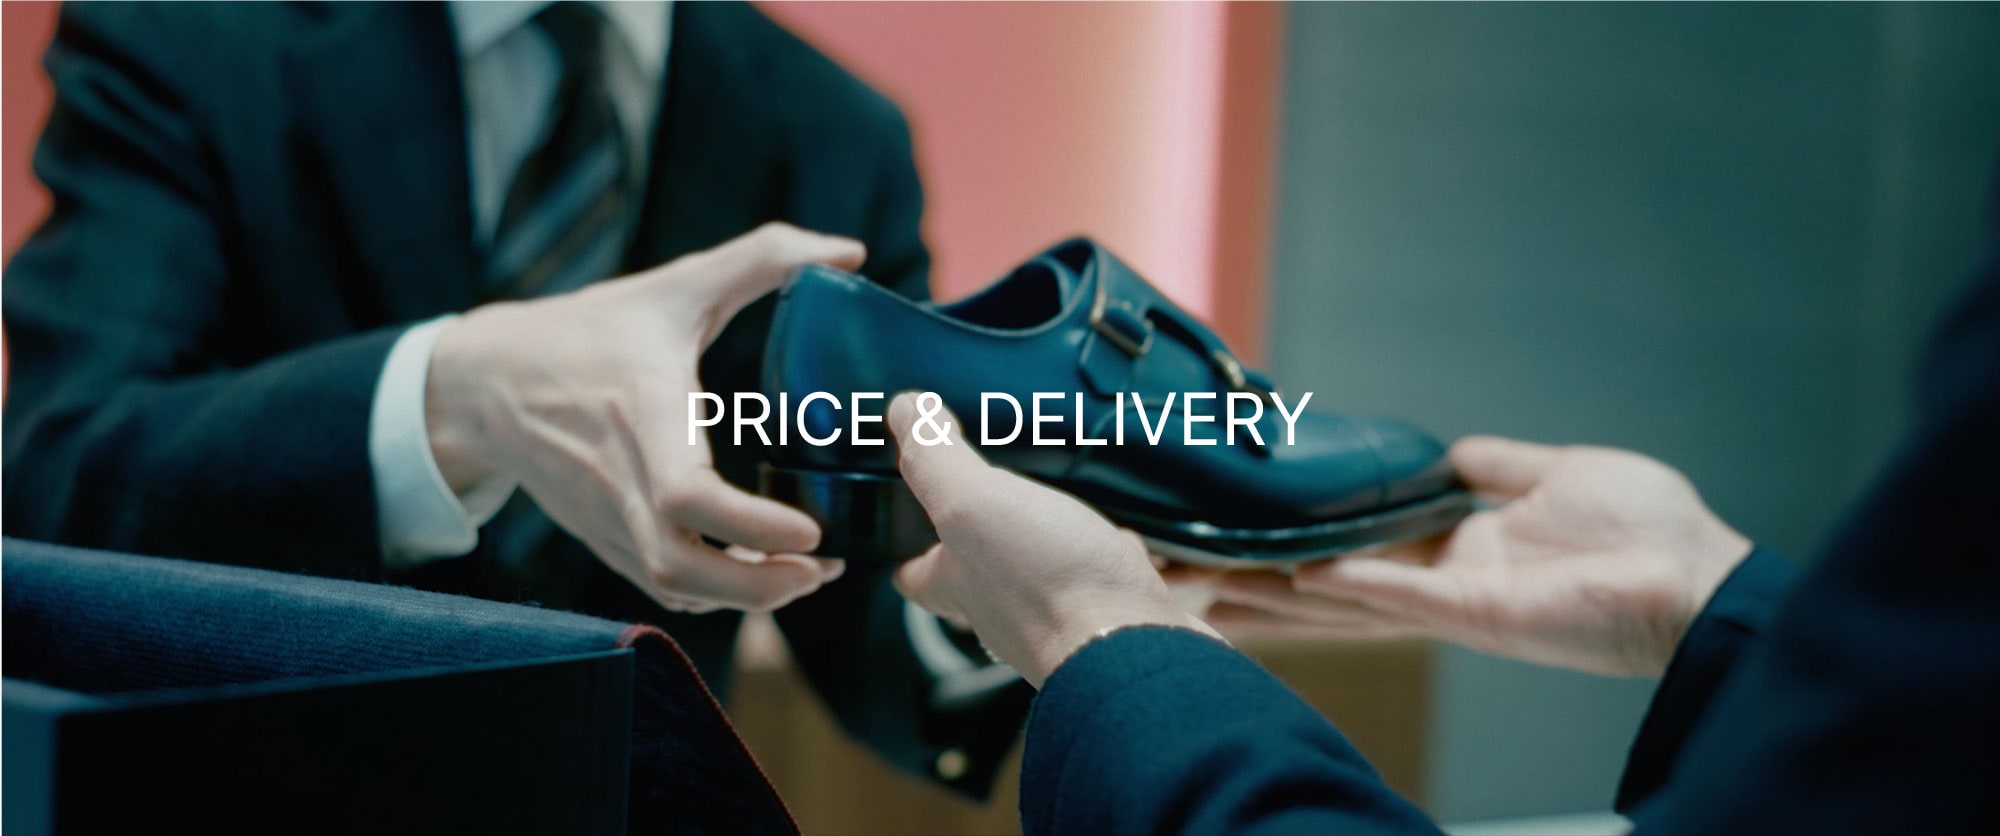 PRICE & DELIVERY